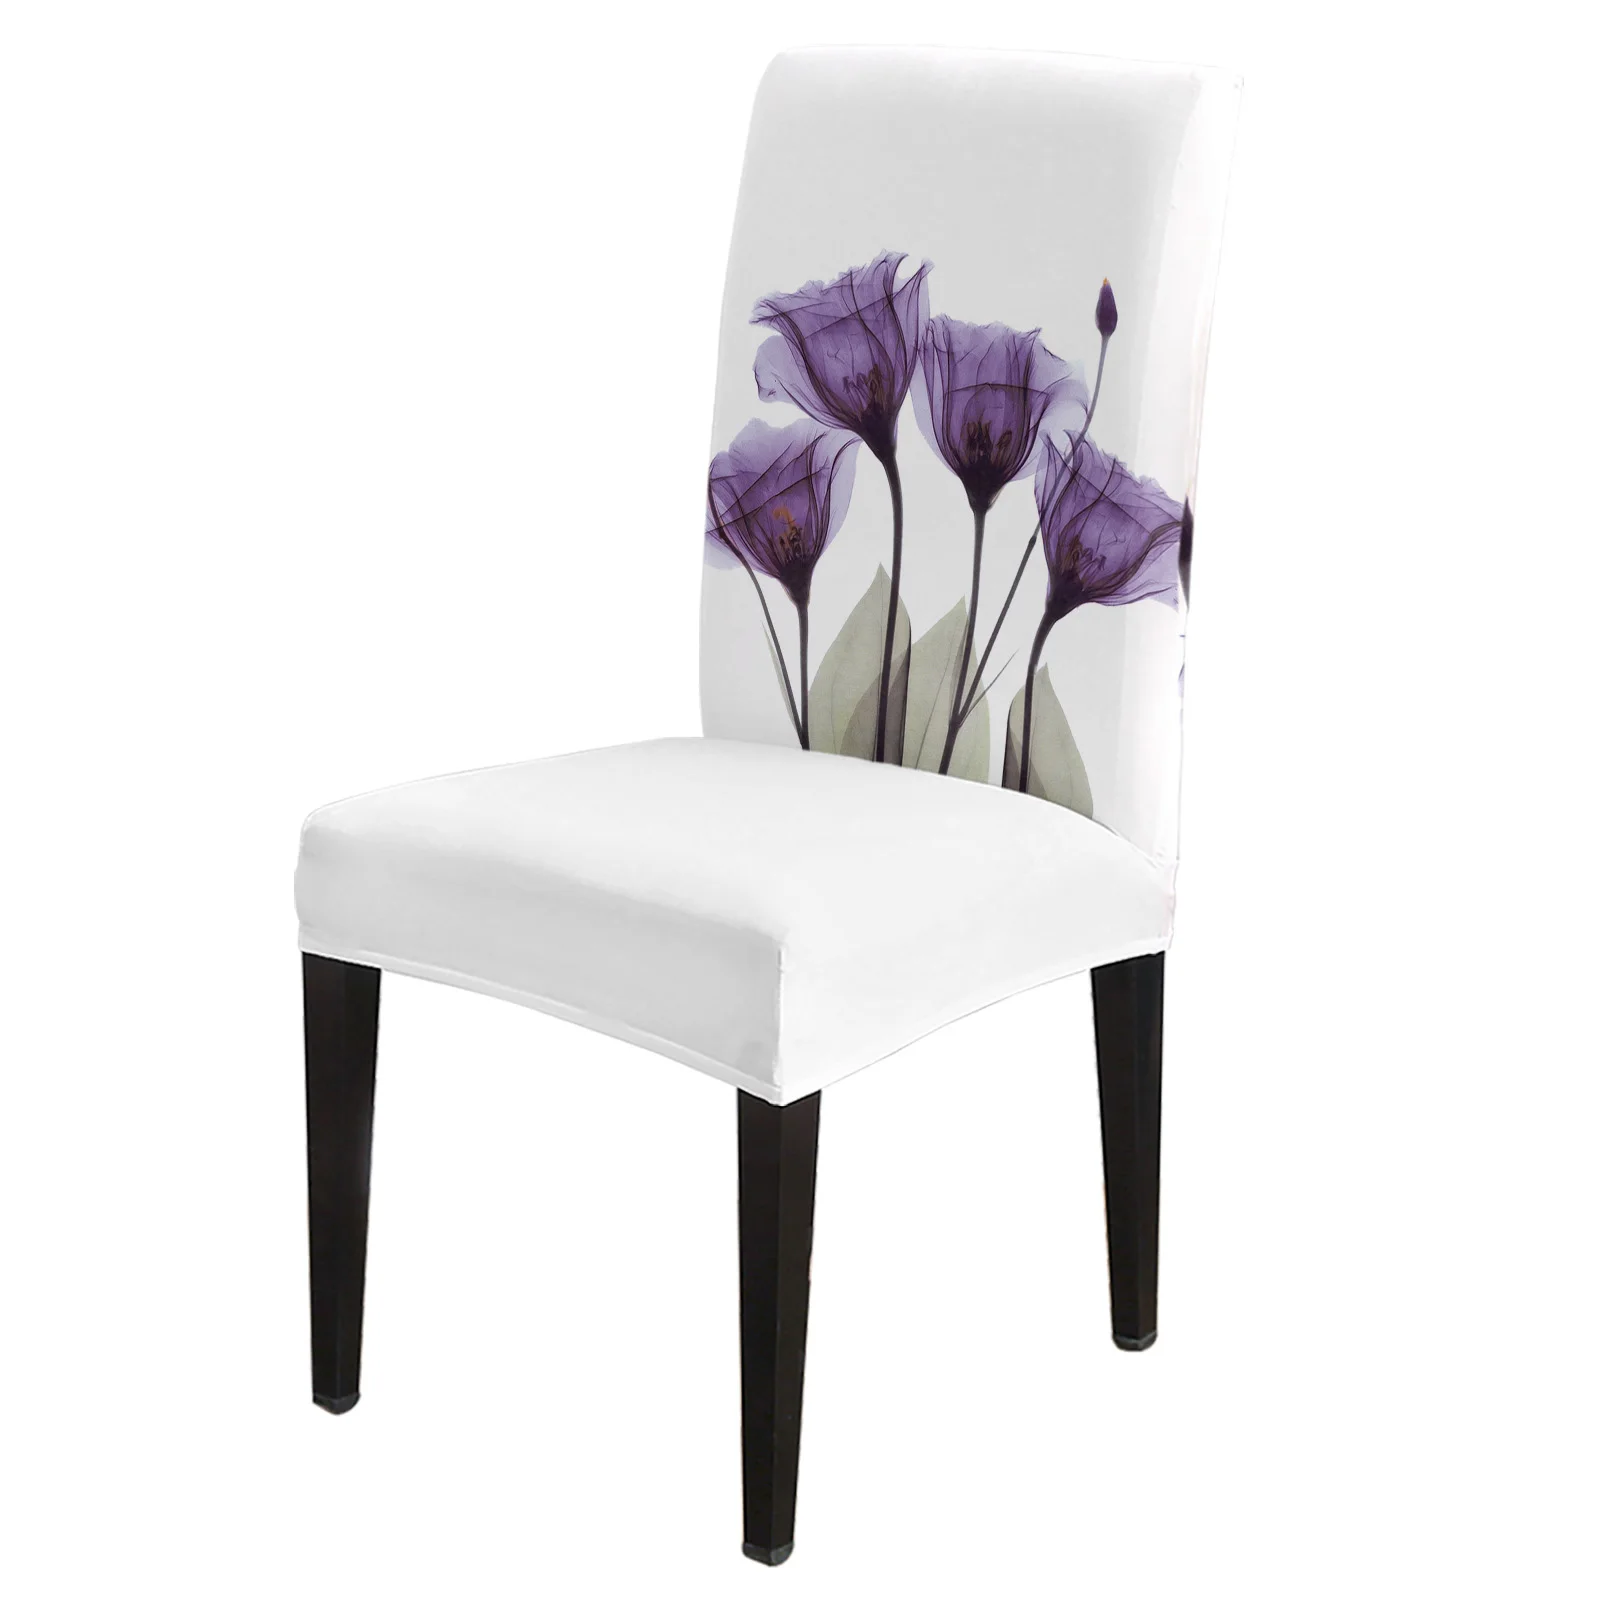 

Flower Summer Idyllic Purple Tulip Chair Covers Dining Room Weddings Banquet Stretch Chair Cover Kitchen Spandex Chair Cover